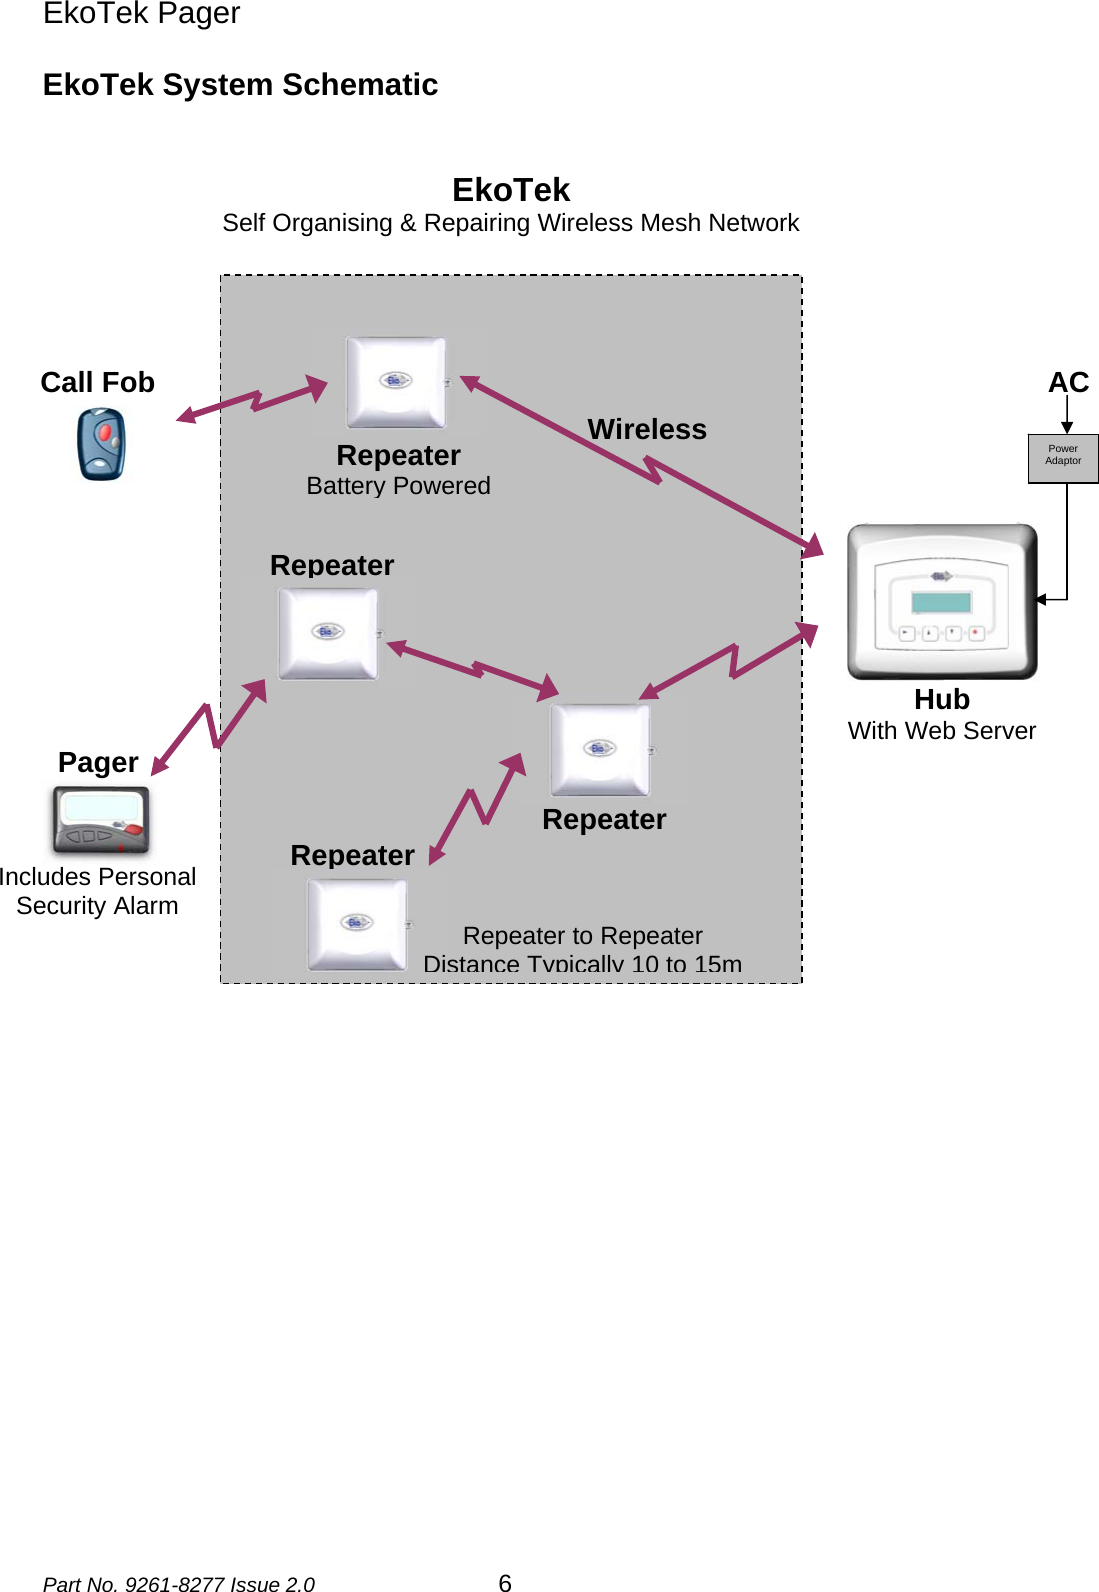 EkoTek Pager  EkoTek System Schematic    EkoTek Self Organising &amp; Repairing Wireless Mesh Network   Power Adaptor ACRepeater Wireless Call Fob Pager Repeater Repeater Repeater Battery PoweredRepeater to Repeater Distance Typically 10 to 15mIncludes Personal Security Alarm Hub With Web ServerPart No. 9261-8277 Issue 2.0 6 